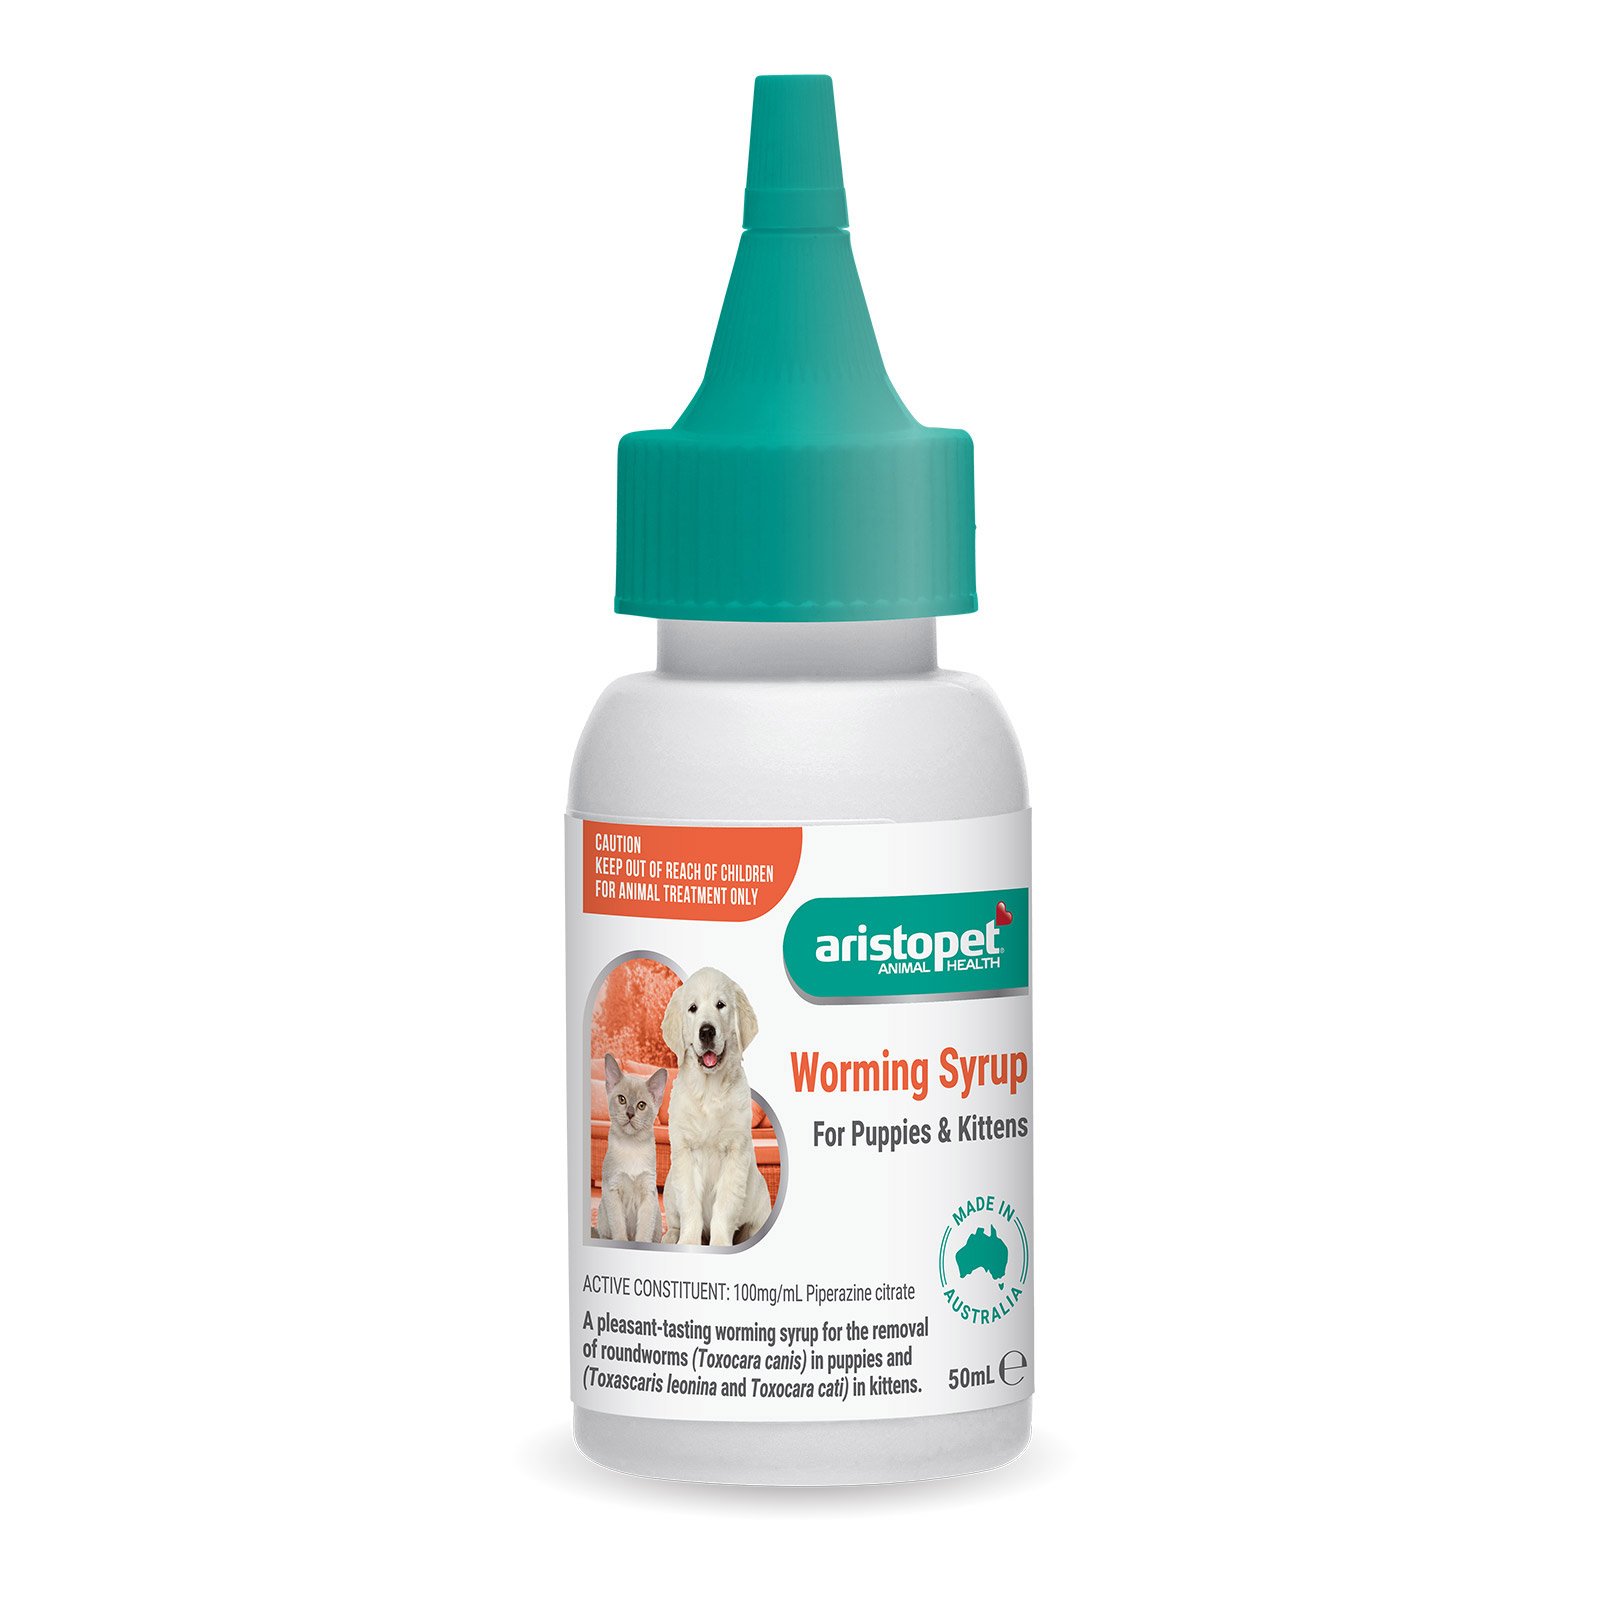 Aristopet Worming Syrup